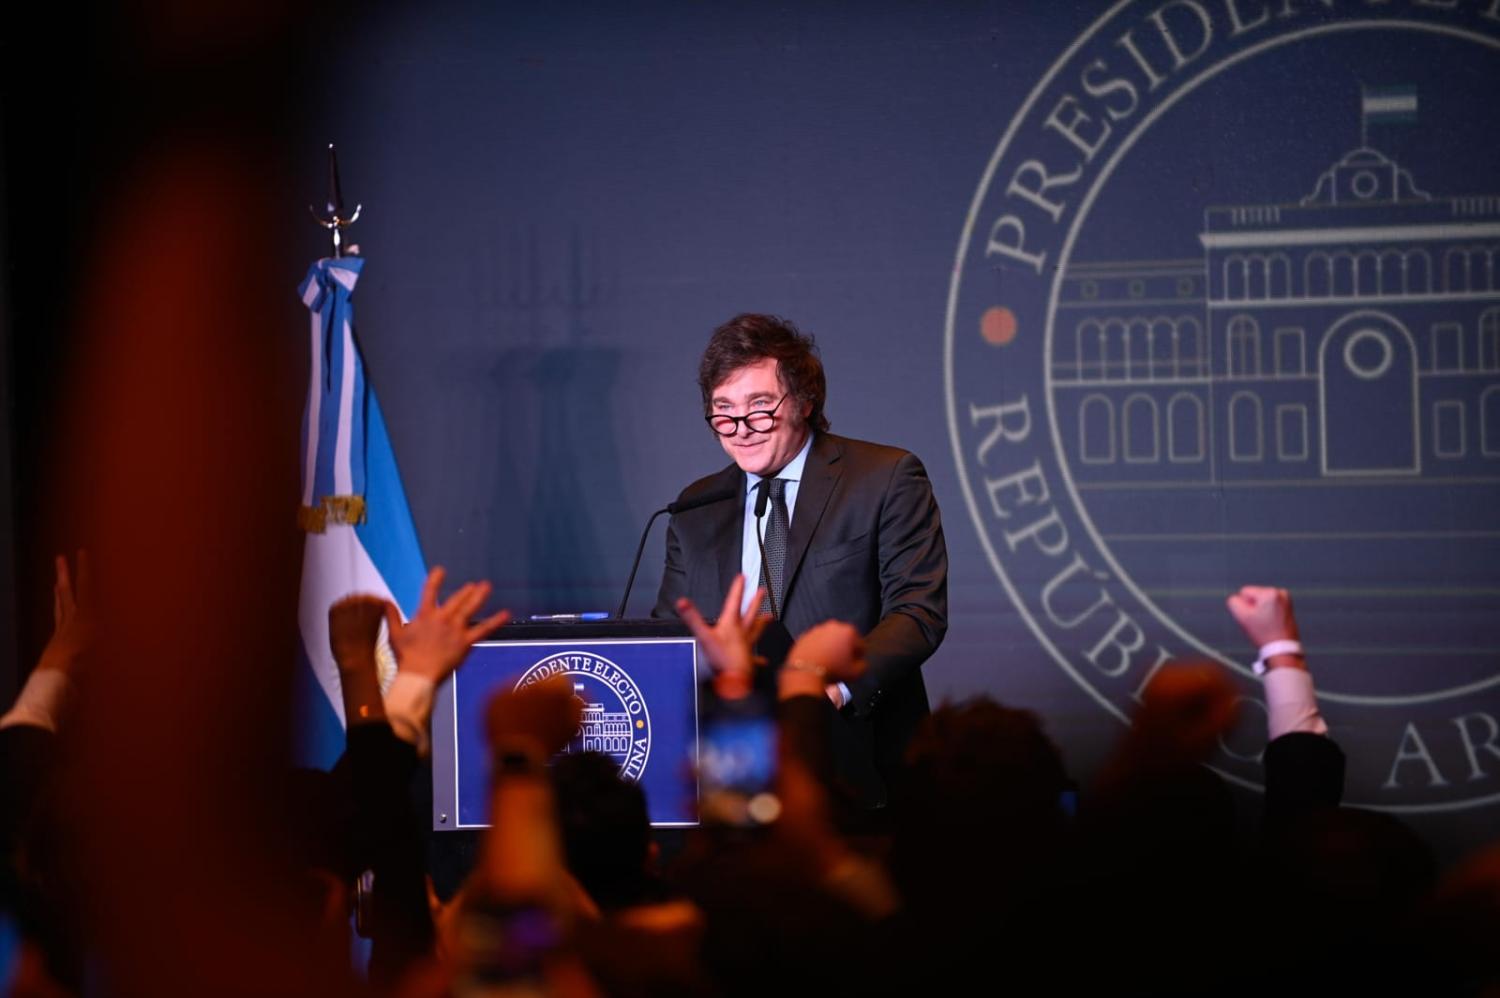 Javier Milei, president elect of Argentina, following his victory in the run-off election on 19 November (Igor Wagner via Getty Images)